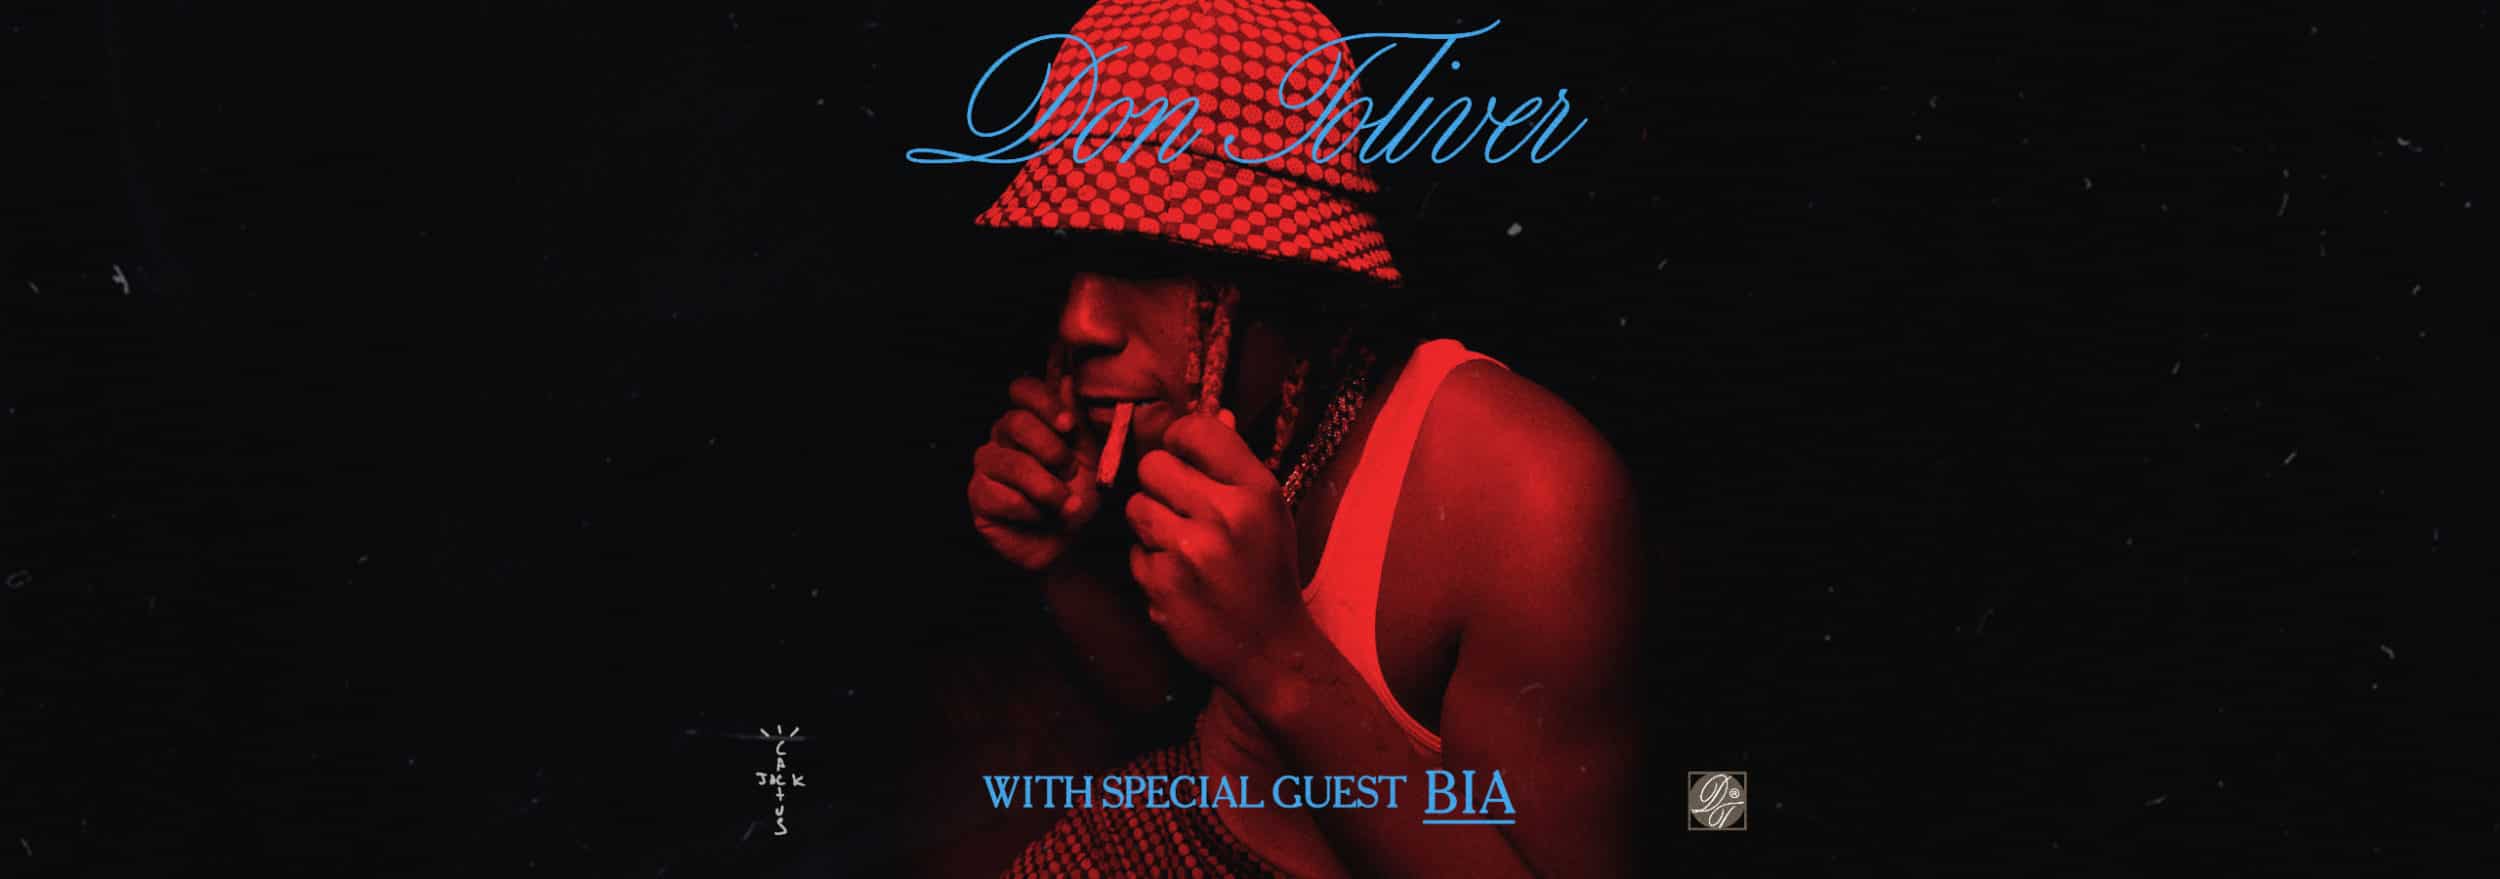 Don Toliver: Life of A Don Tour